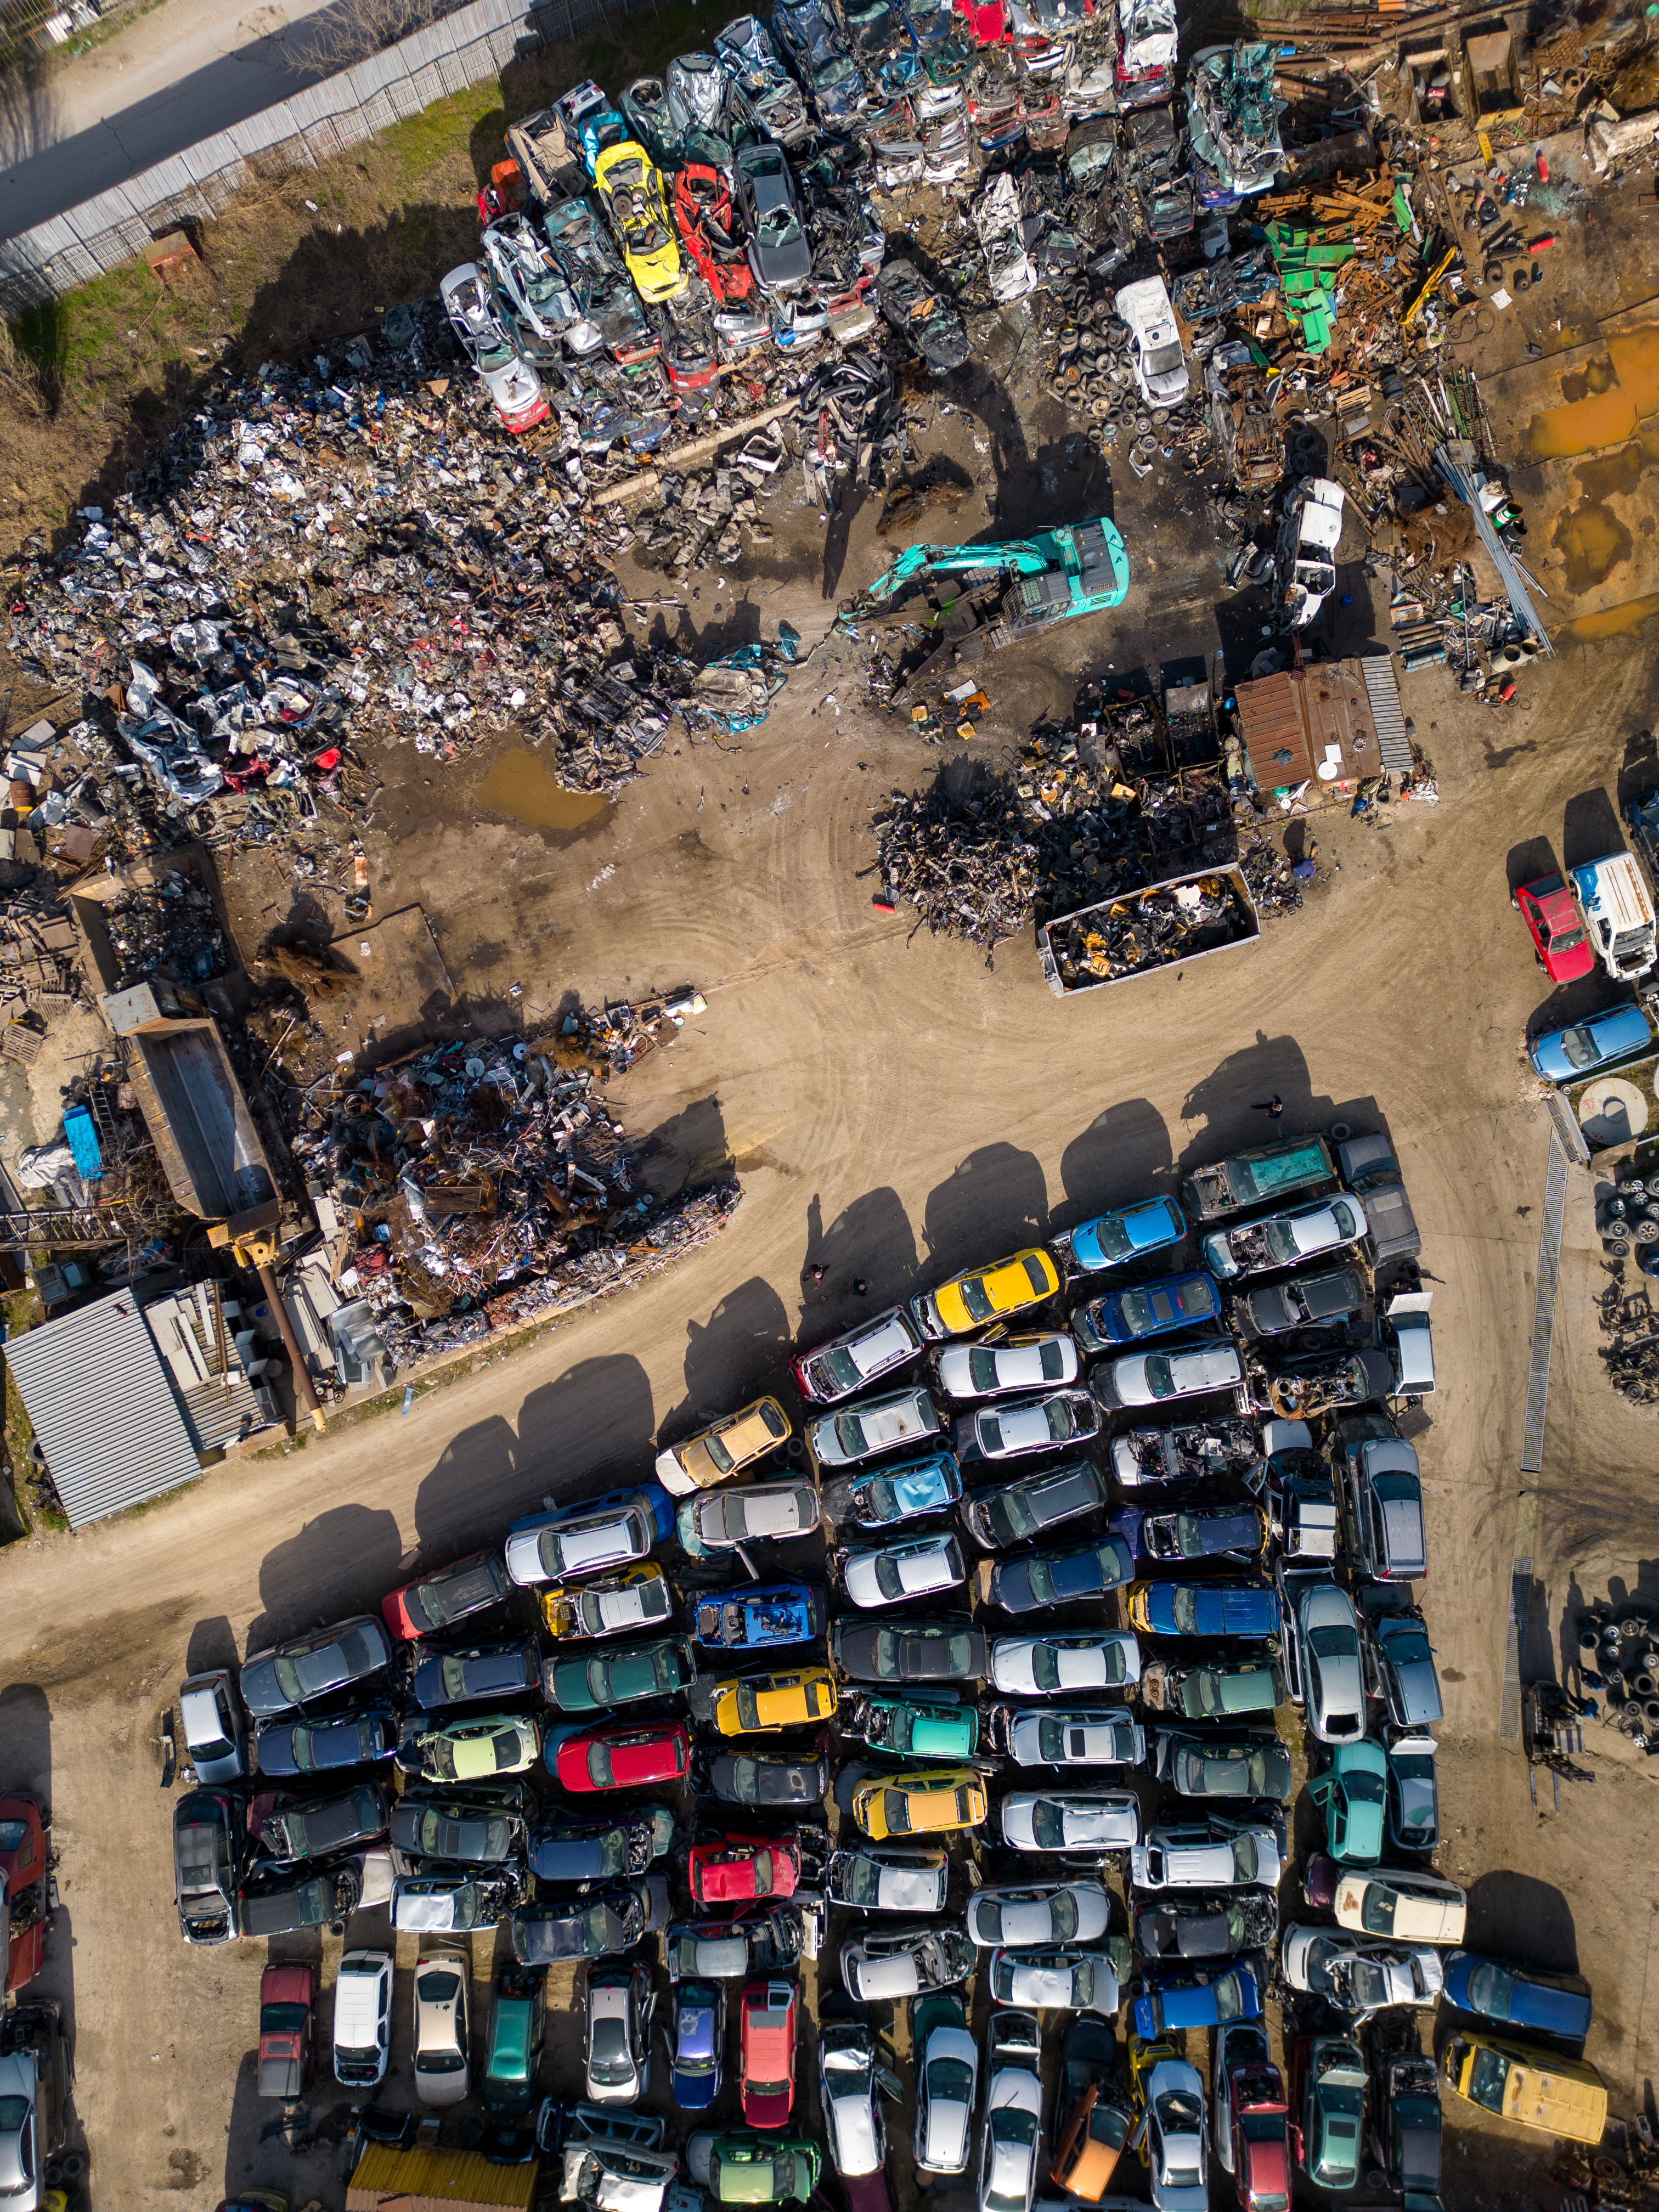 aerial view of a car dump, where a machine is seen separating old cars into scrap.